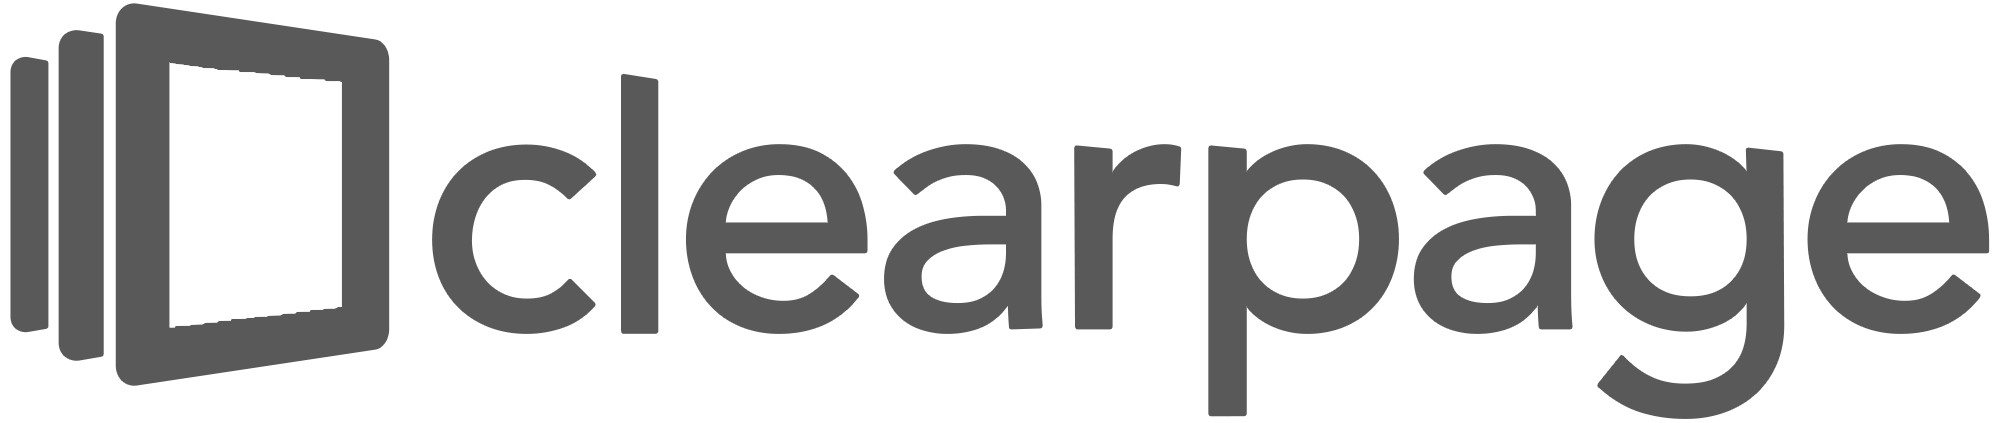 Clearpage Logo